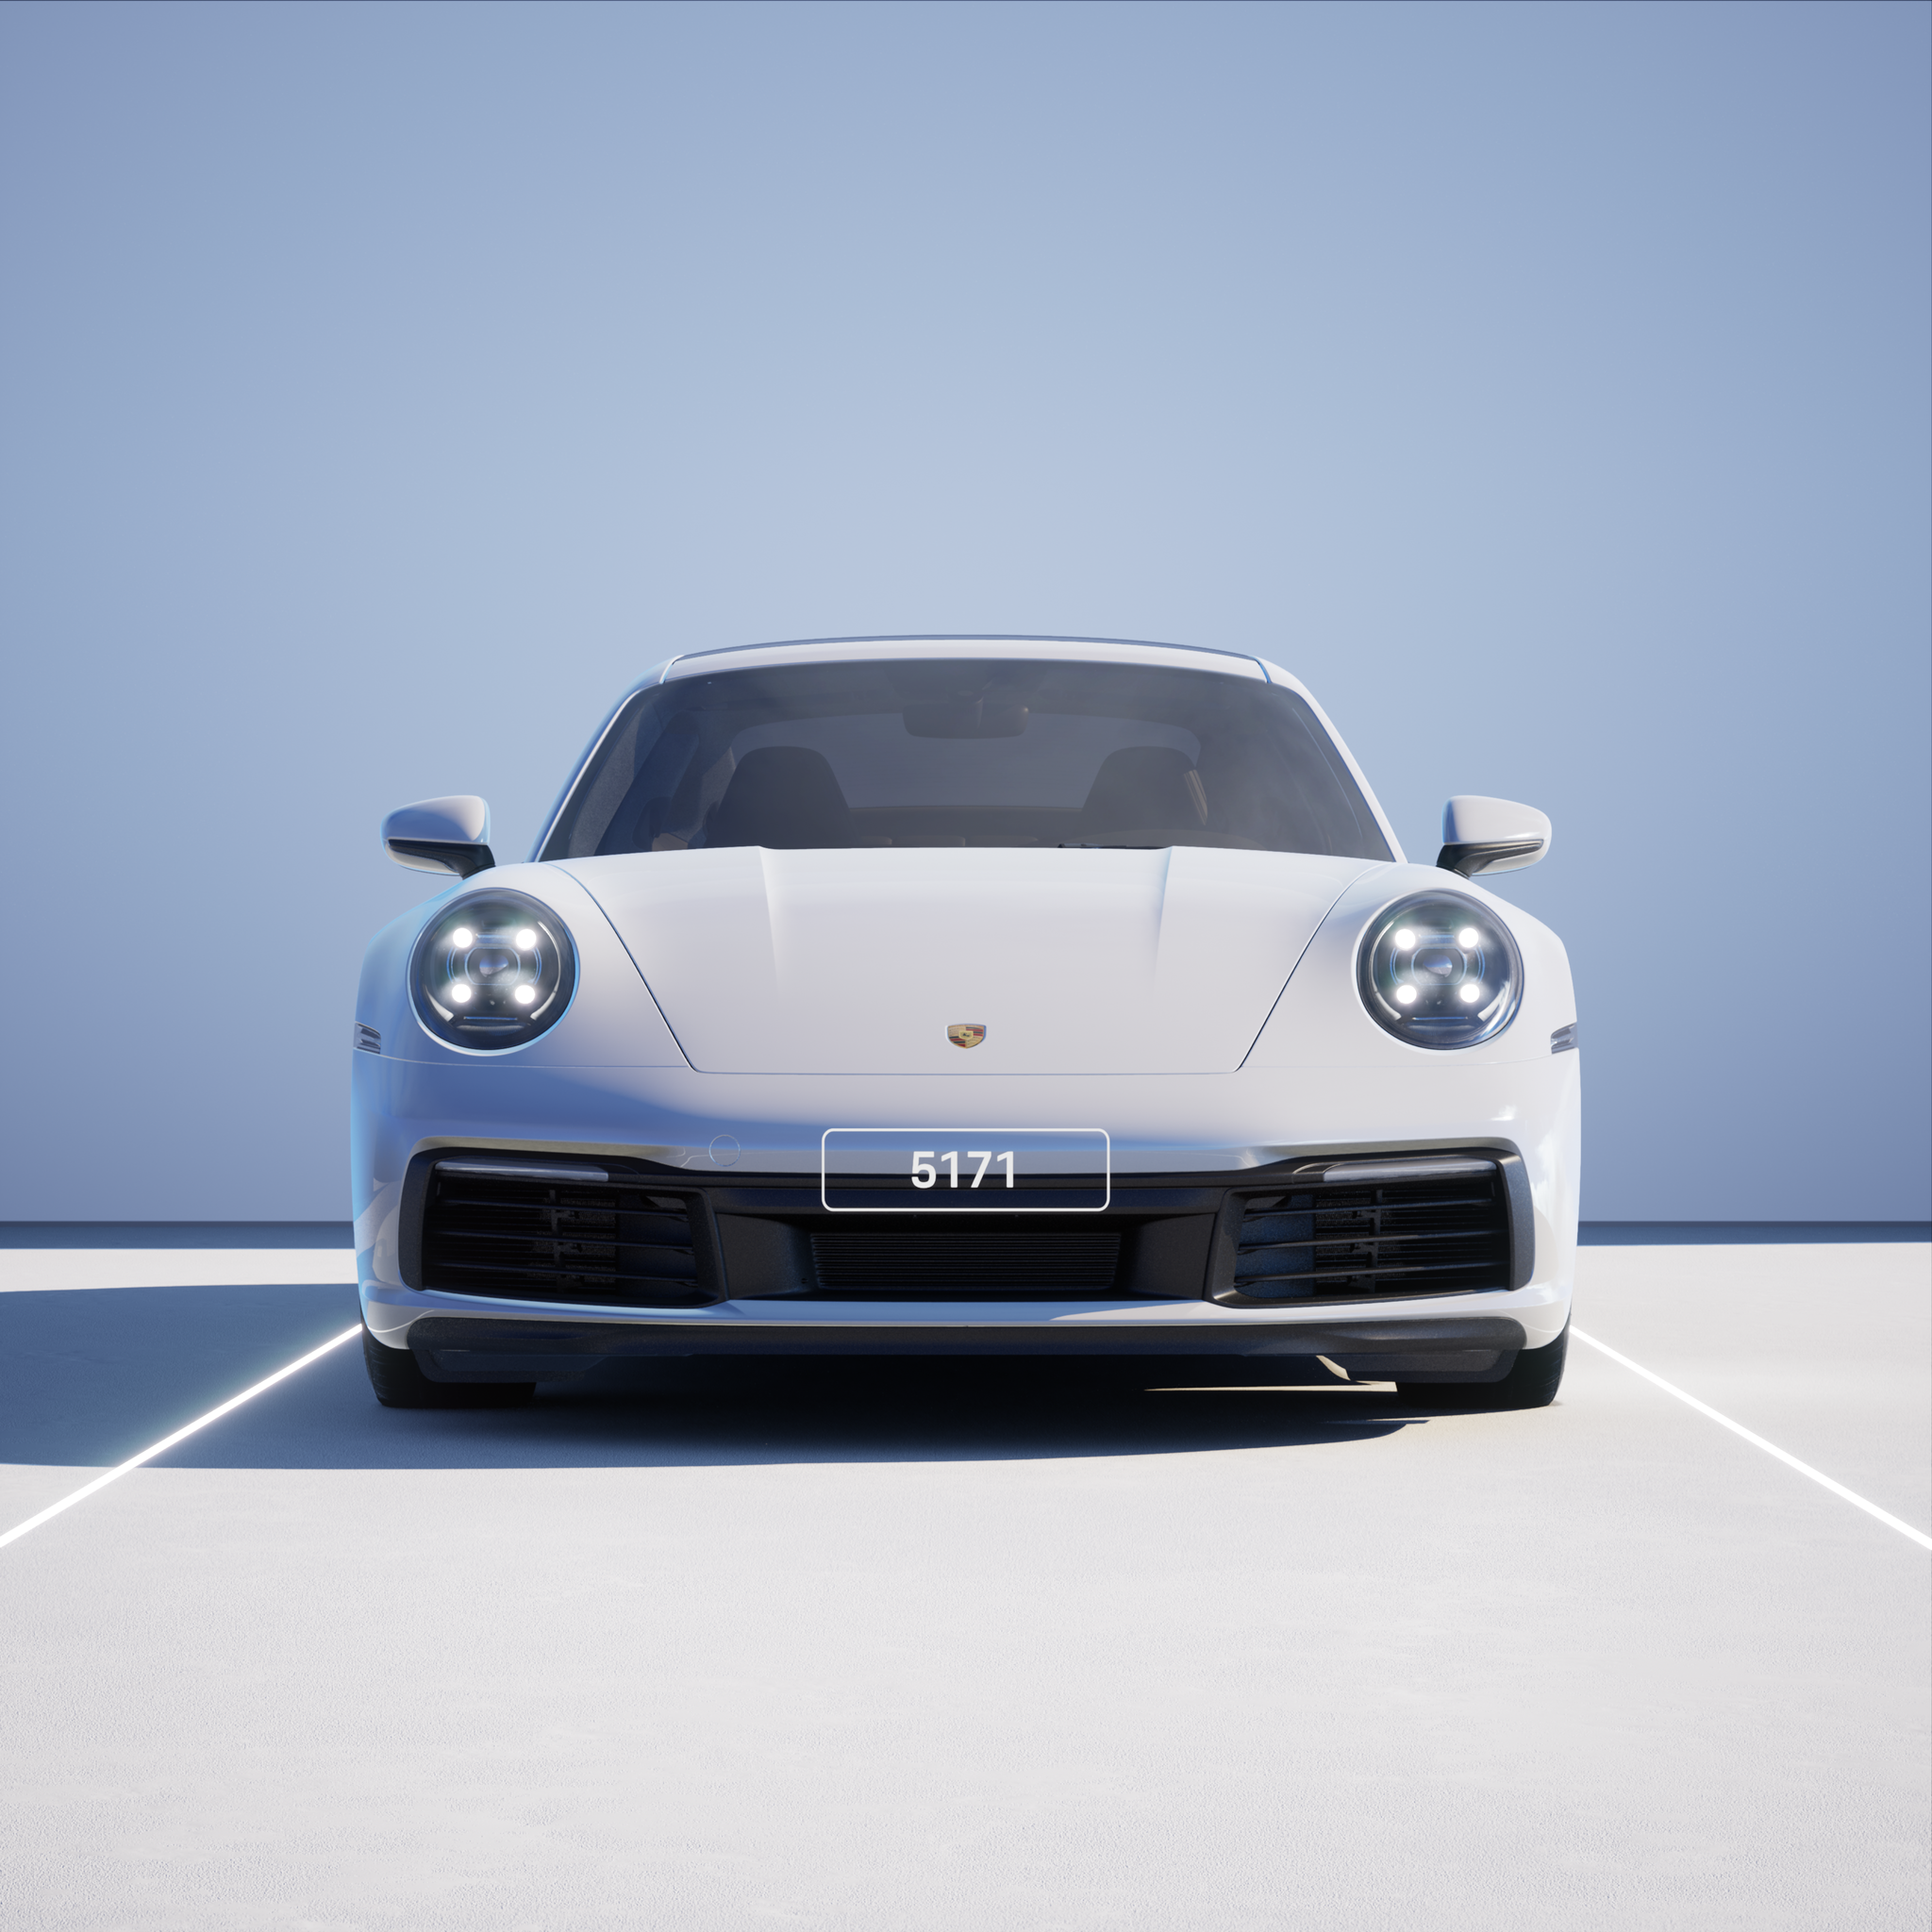 The PORSCHΞ 911 5171 image in phase